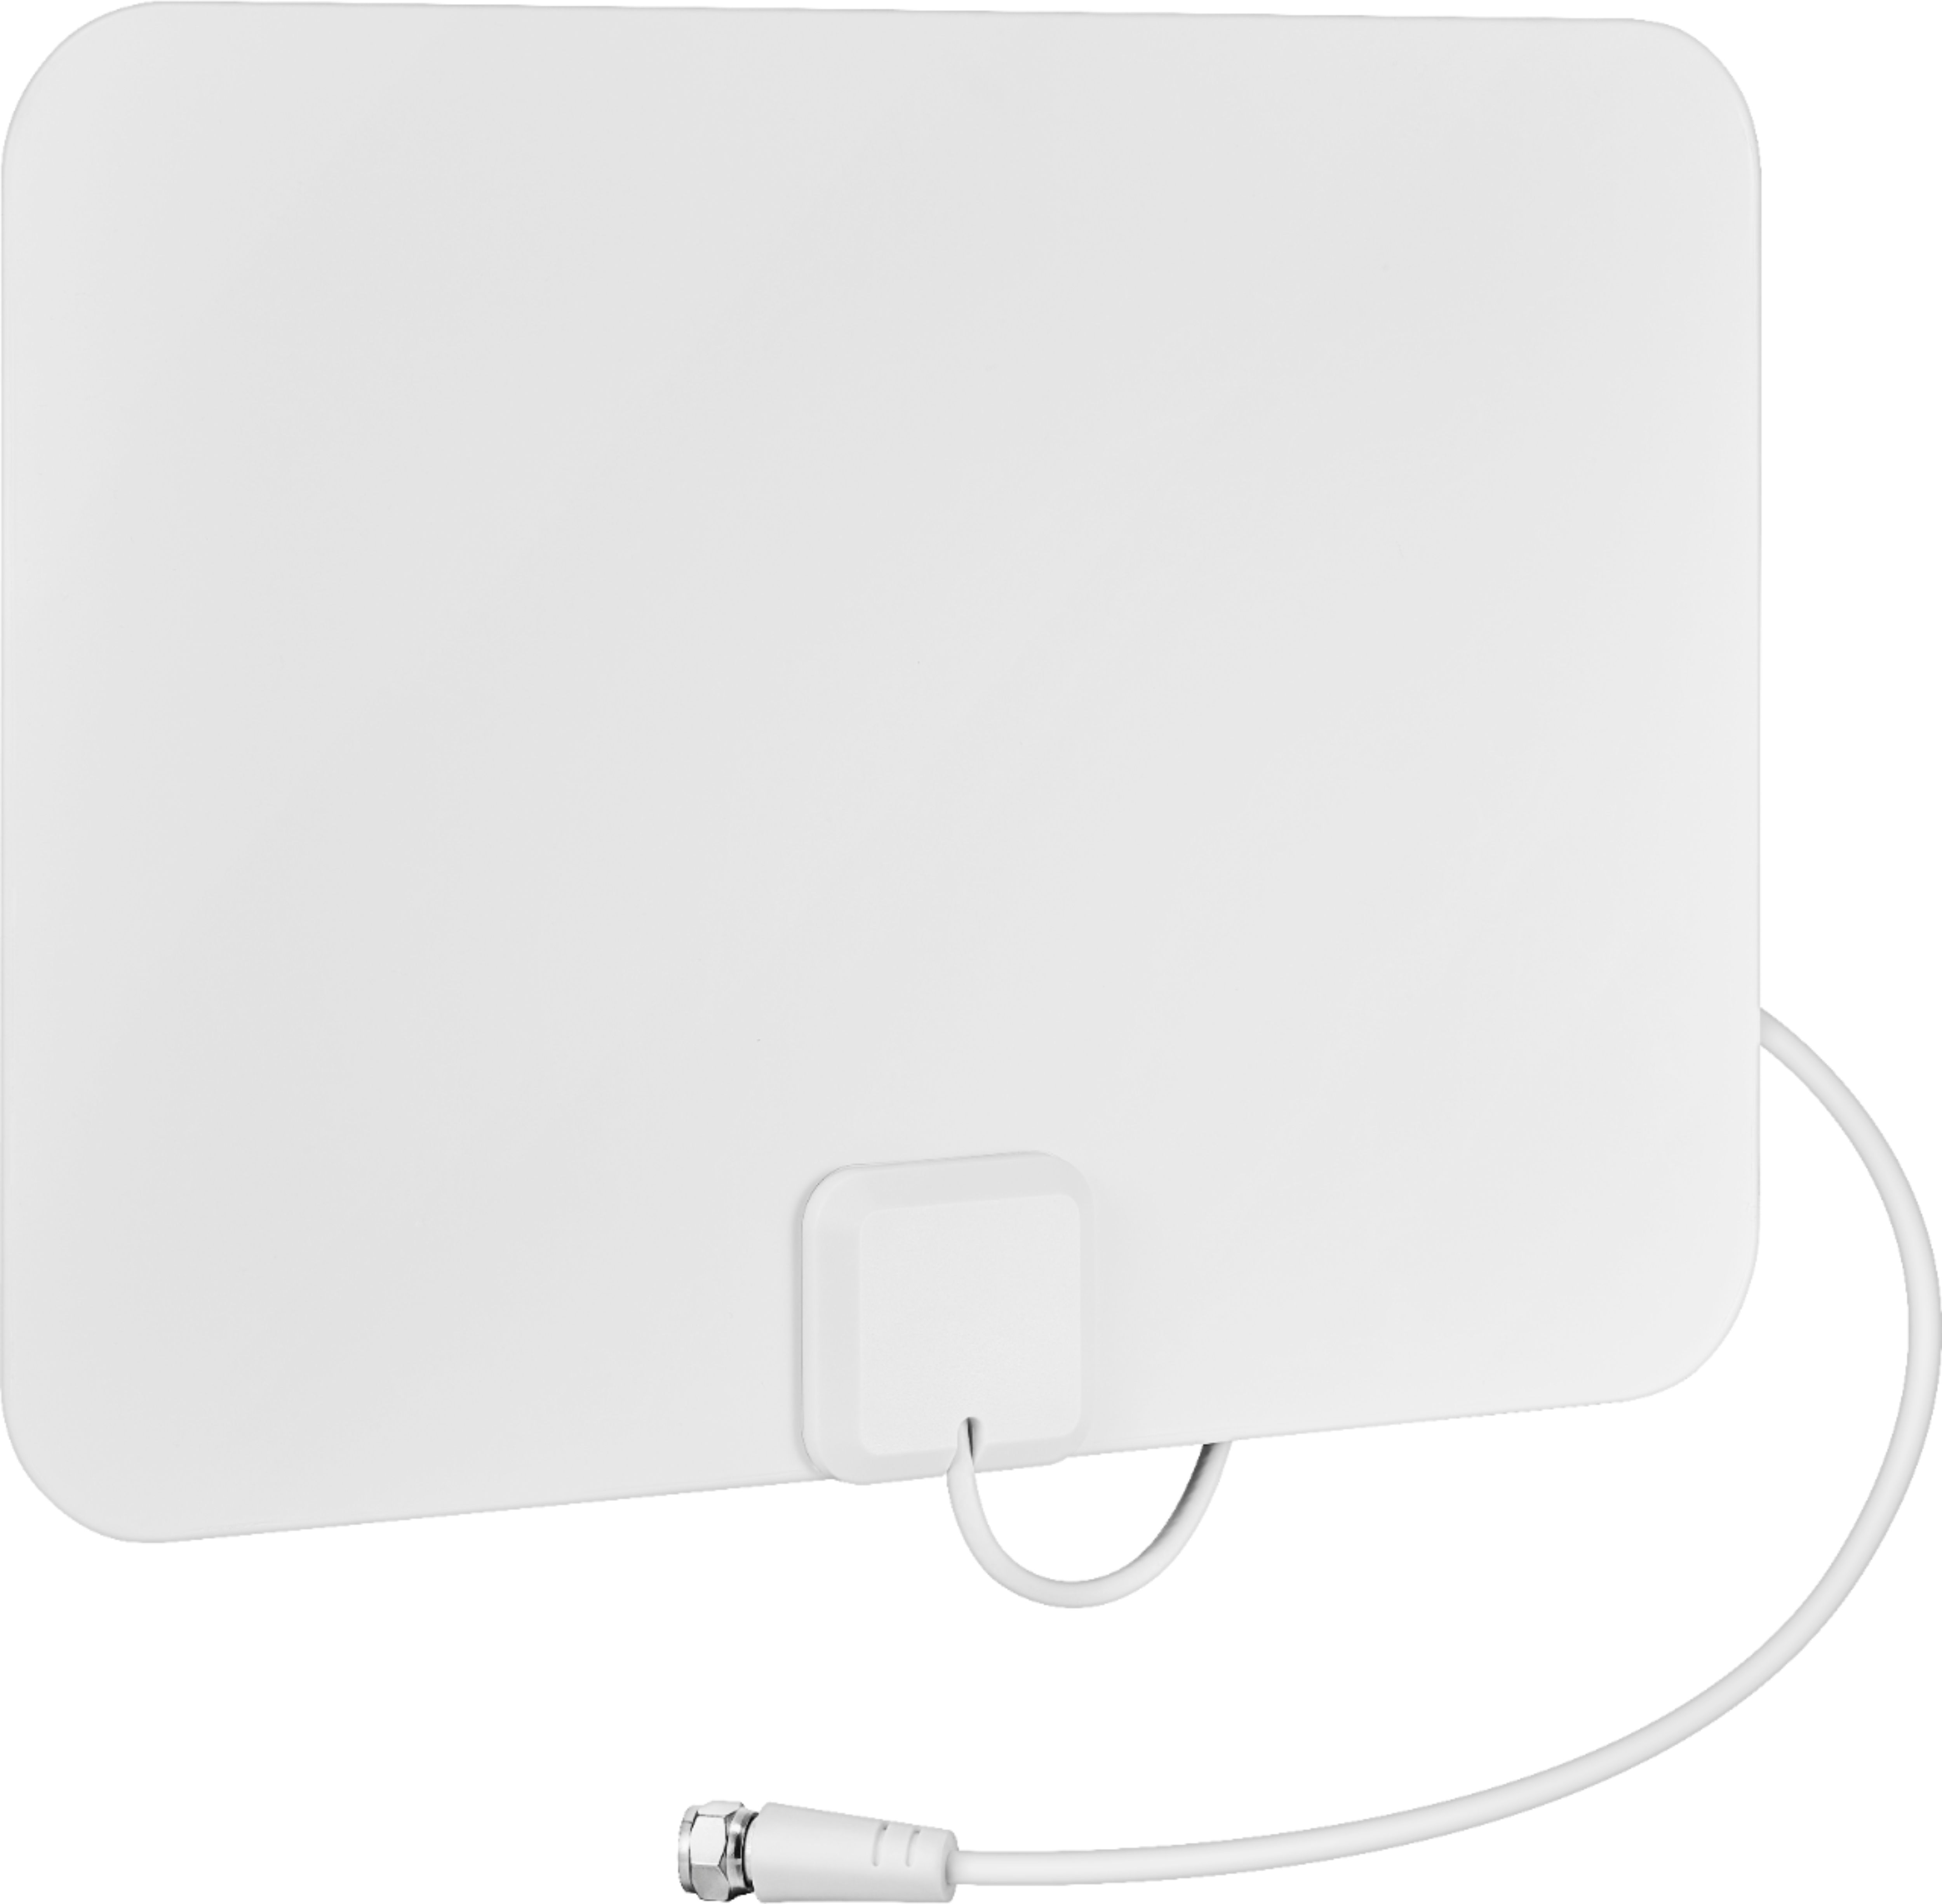 Angle View: Insignia™ - Ultra-Thin Indoor Plate HDTV Antenna - Black/White